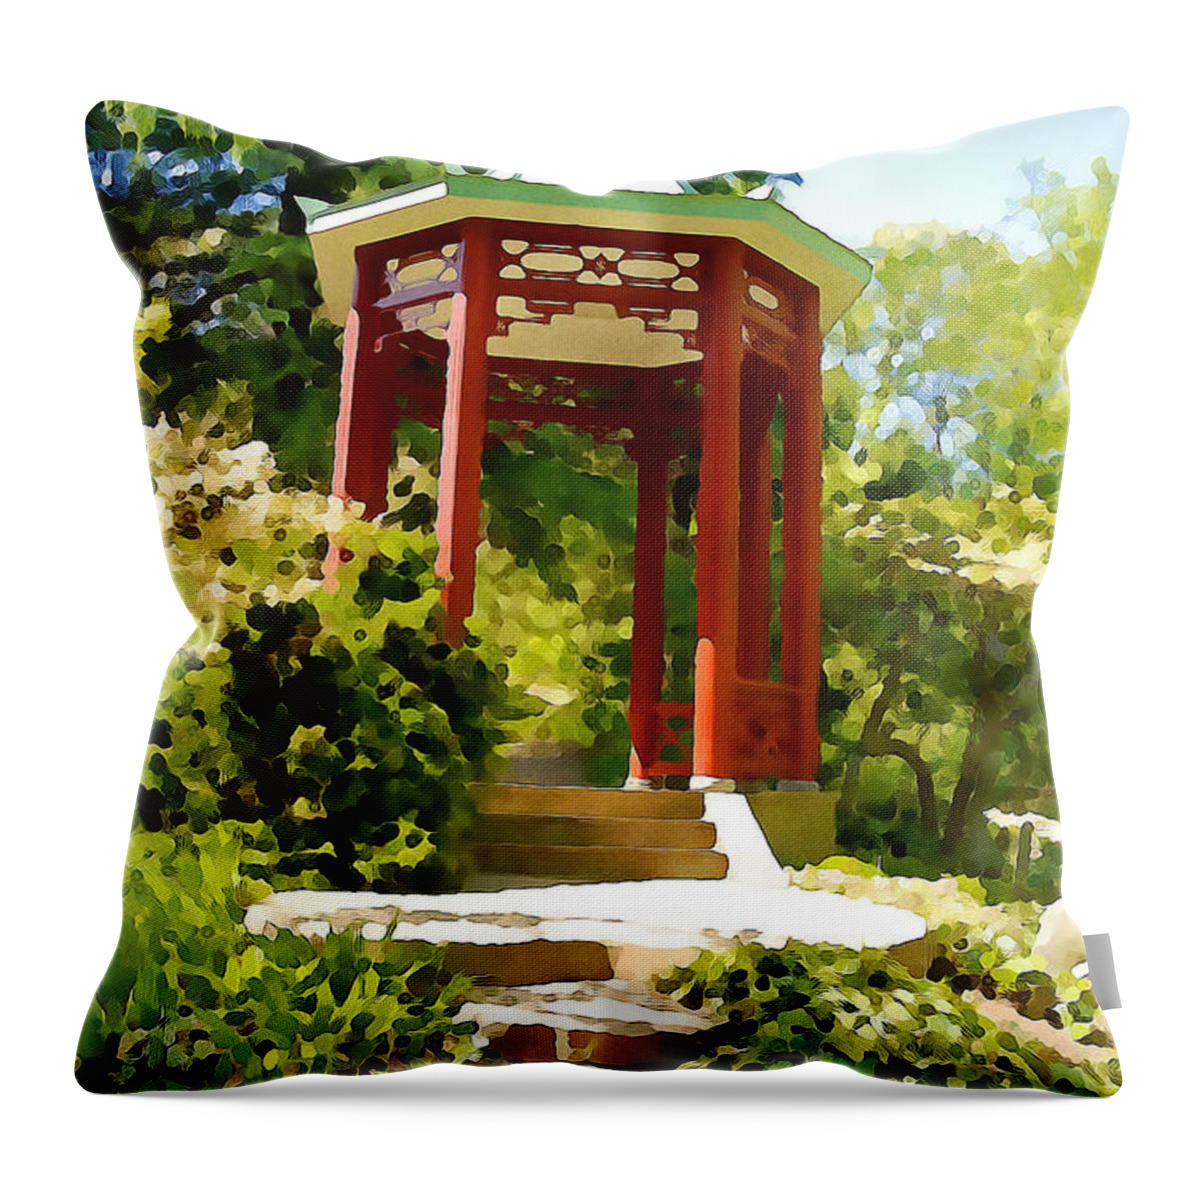 Architecture Throw Pillow featuring the digital art The Red Gazebo by Walter Neal